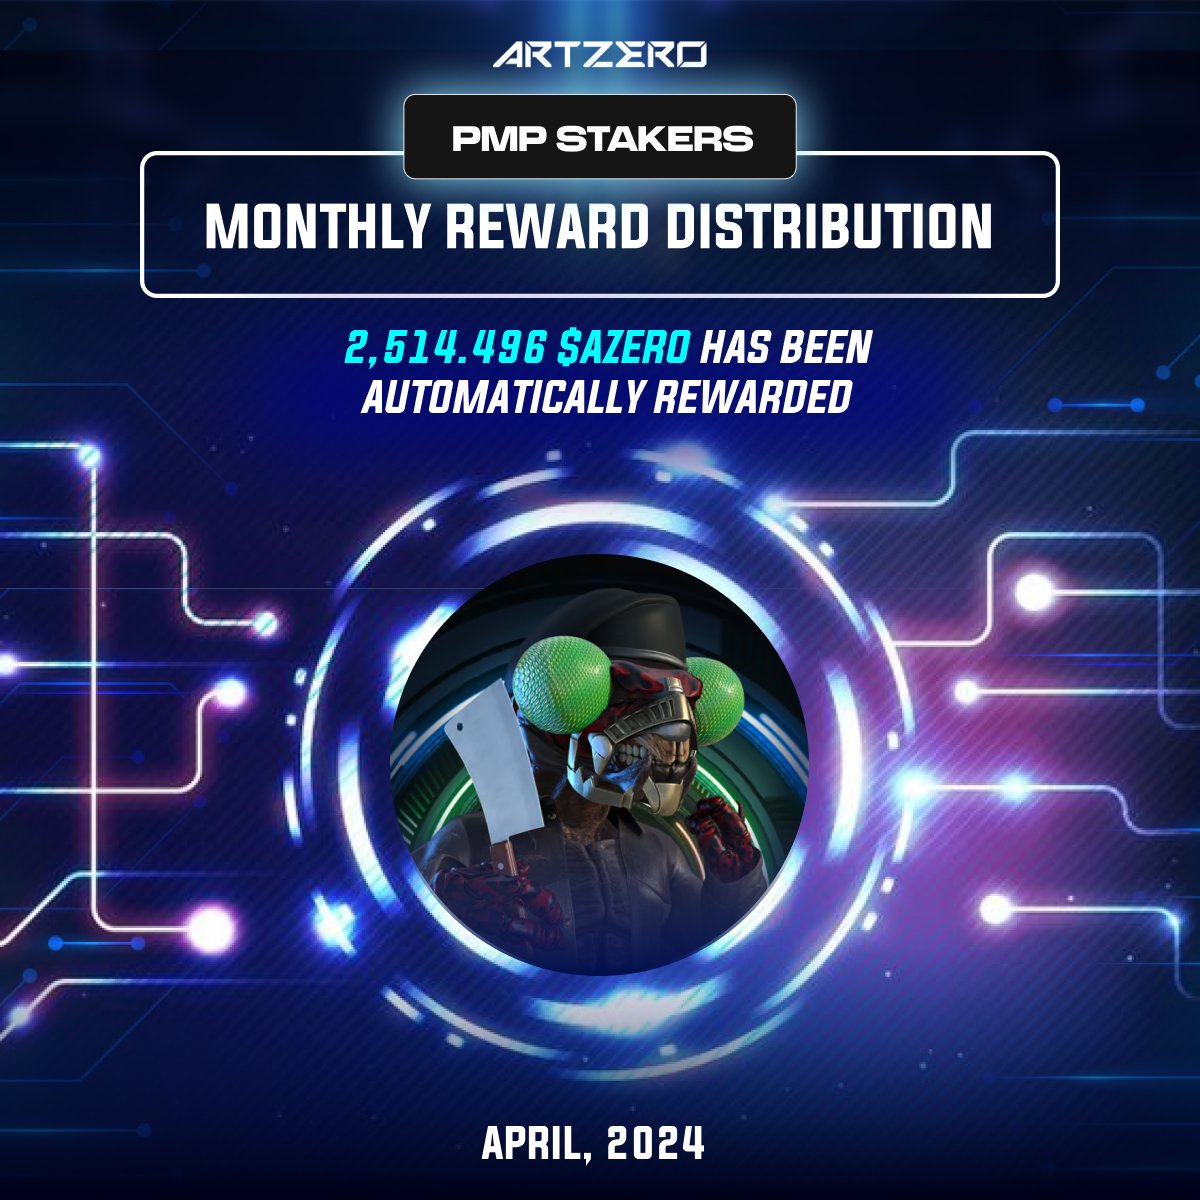 🚀 Exciting news alert! 🚀 🎉 Massive rewards, 2,514.496 $AZERO, automatically granted to all PMP stakers. Congrats to everyone! Did you know? This month, PMP stakers enjoy 100% of validator rewards in AZERO, doubling the previous allocation of 50%! Let's crank up the hype!…